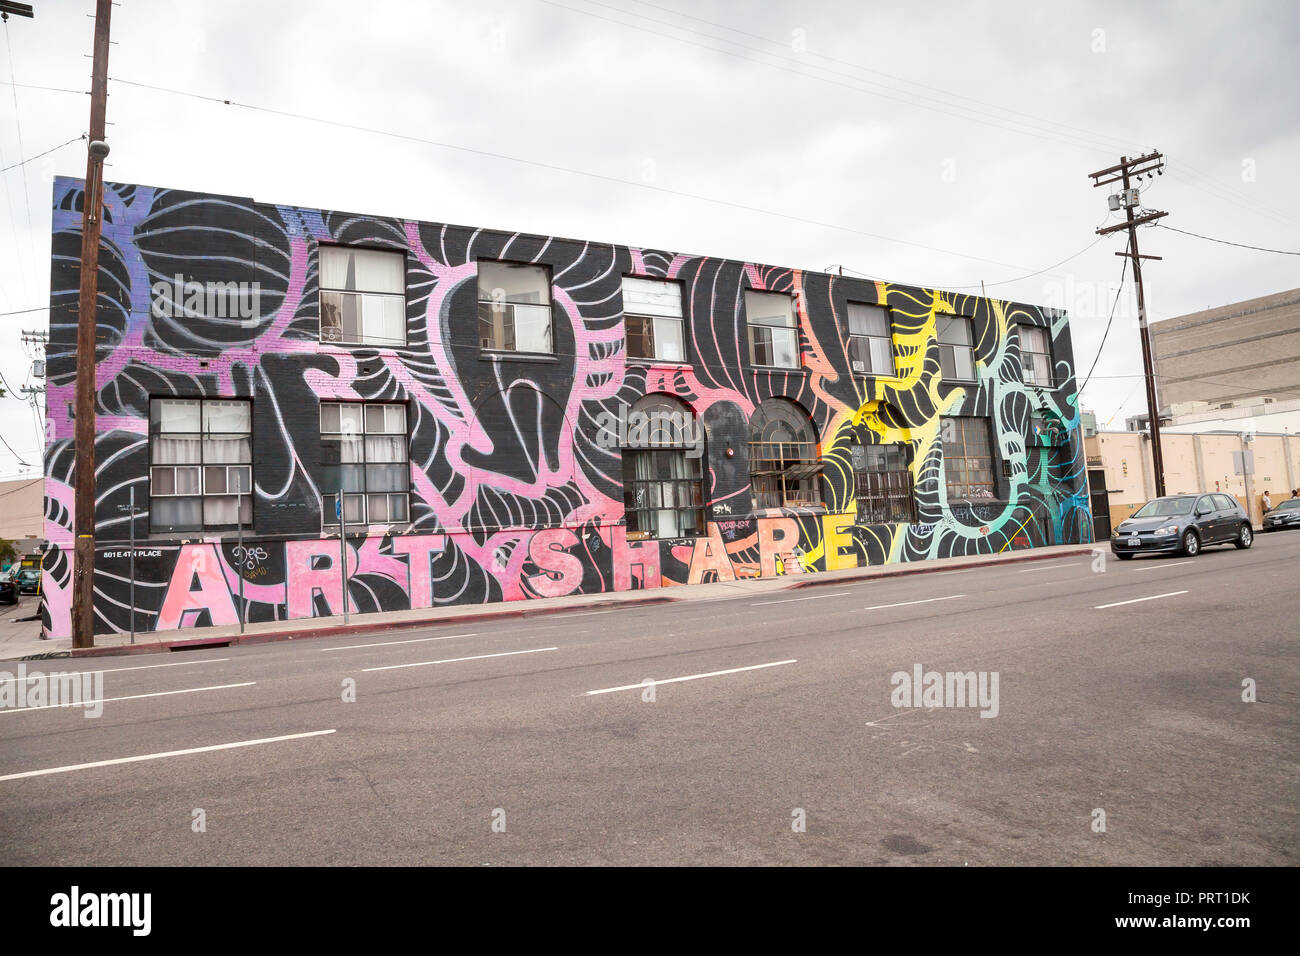 Mural in Art District, Los Angeles, California, USA Stock Photo